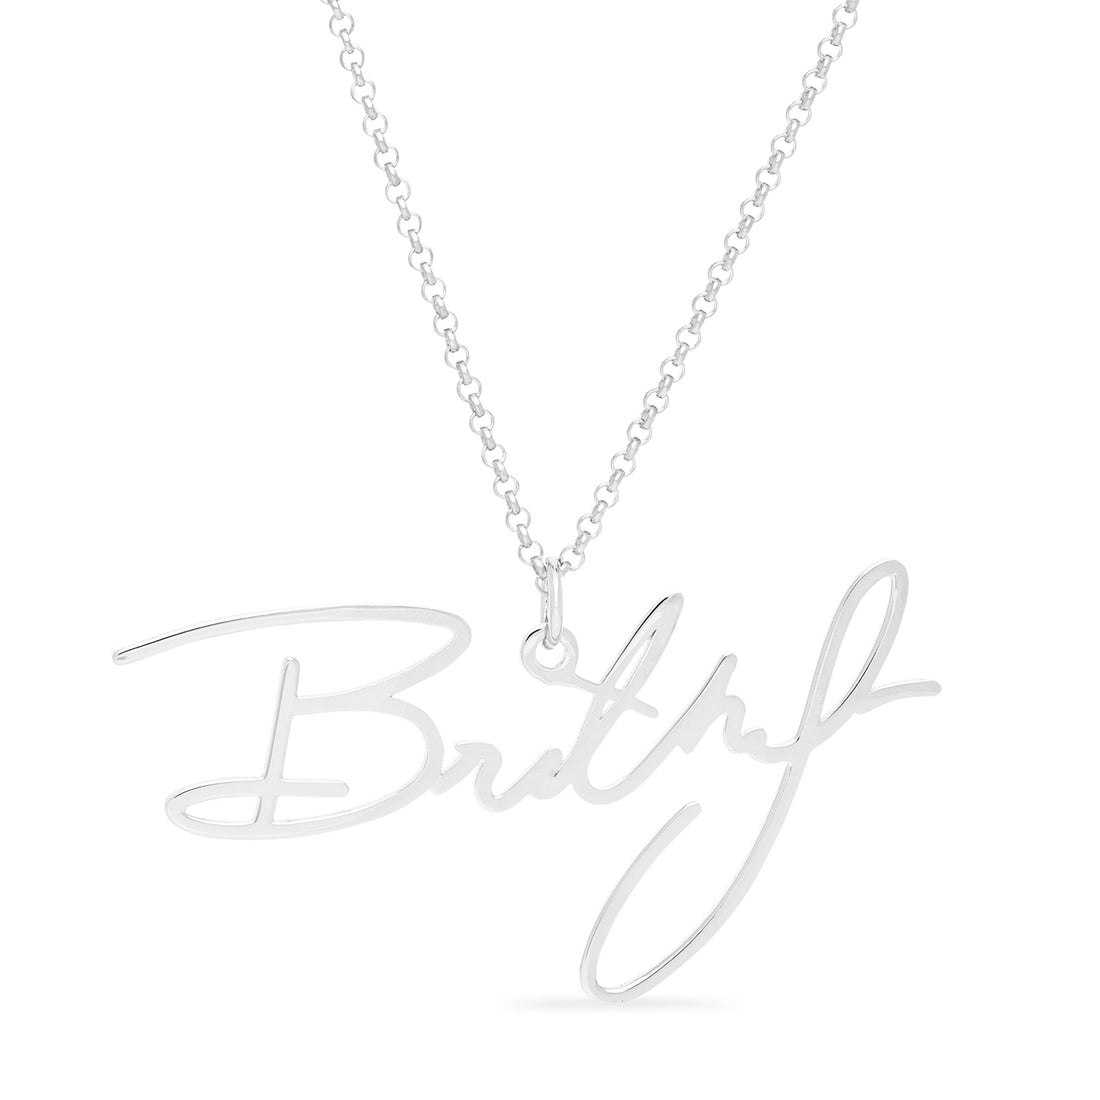 Your Signature Name Necklace